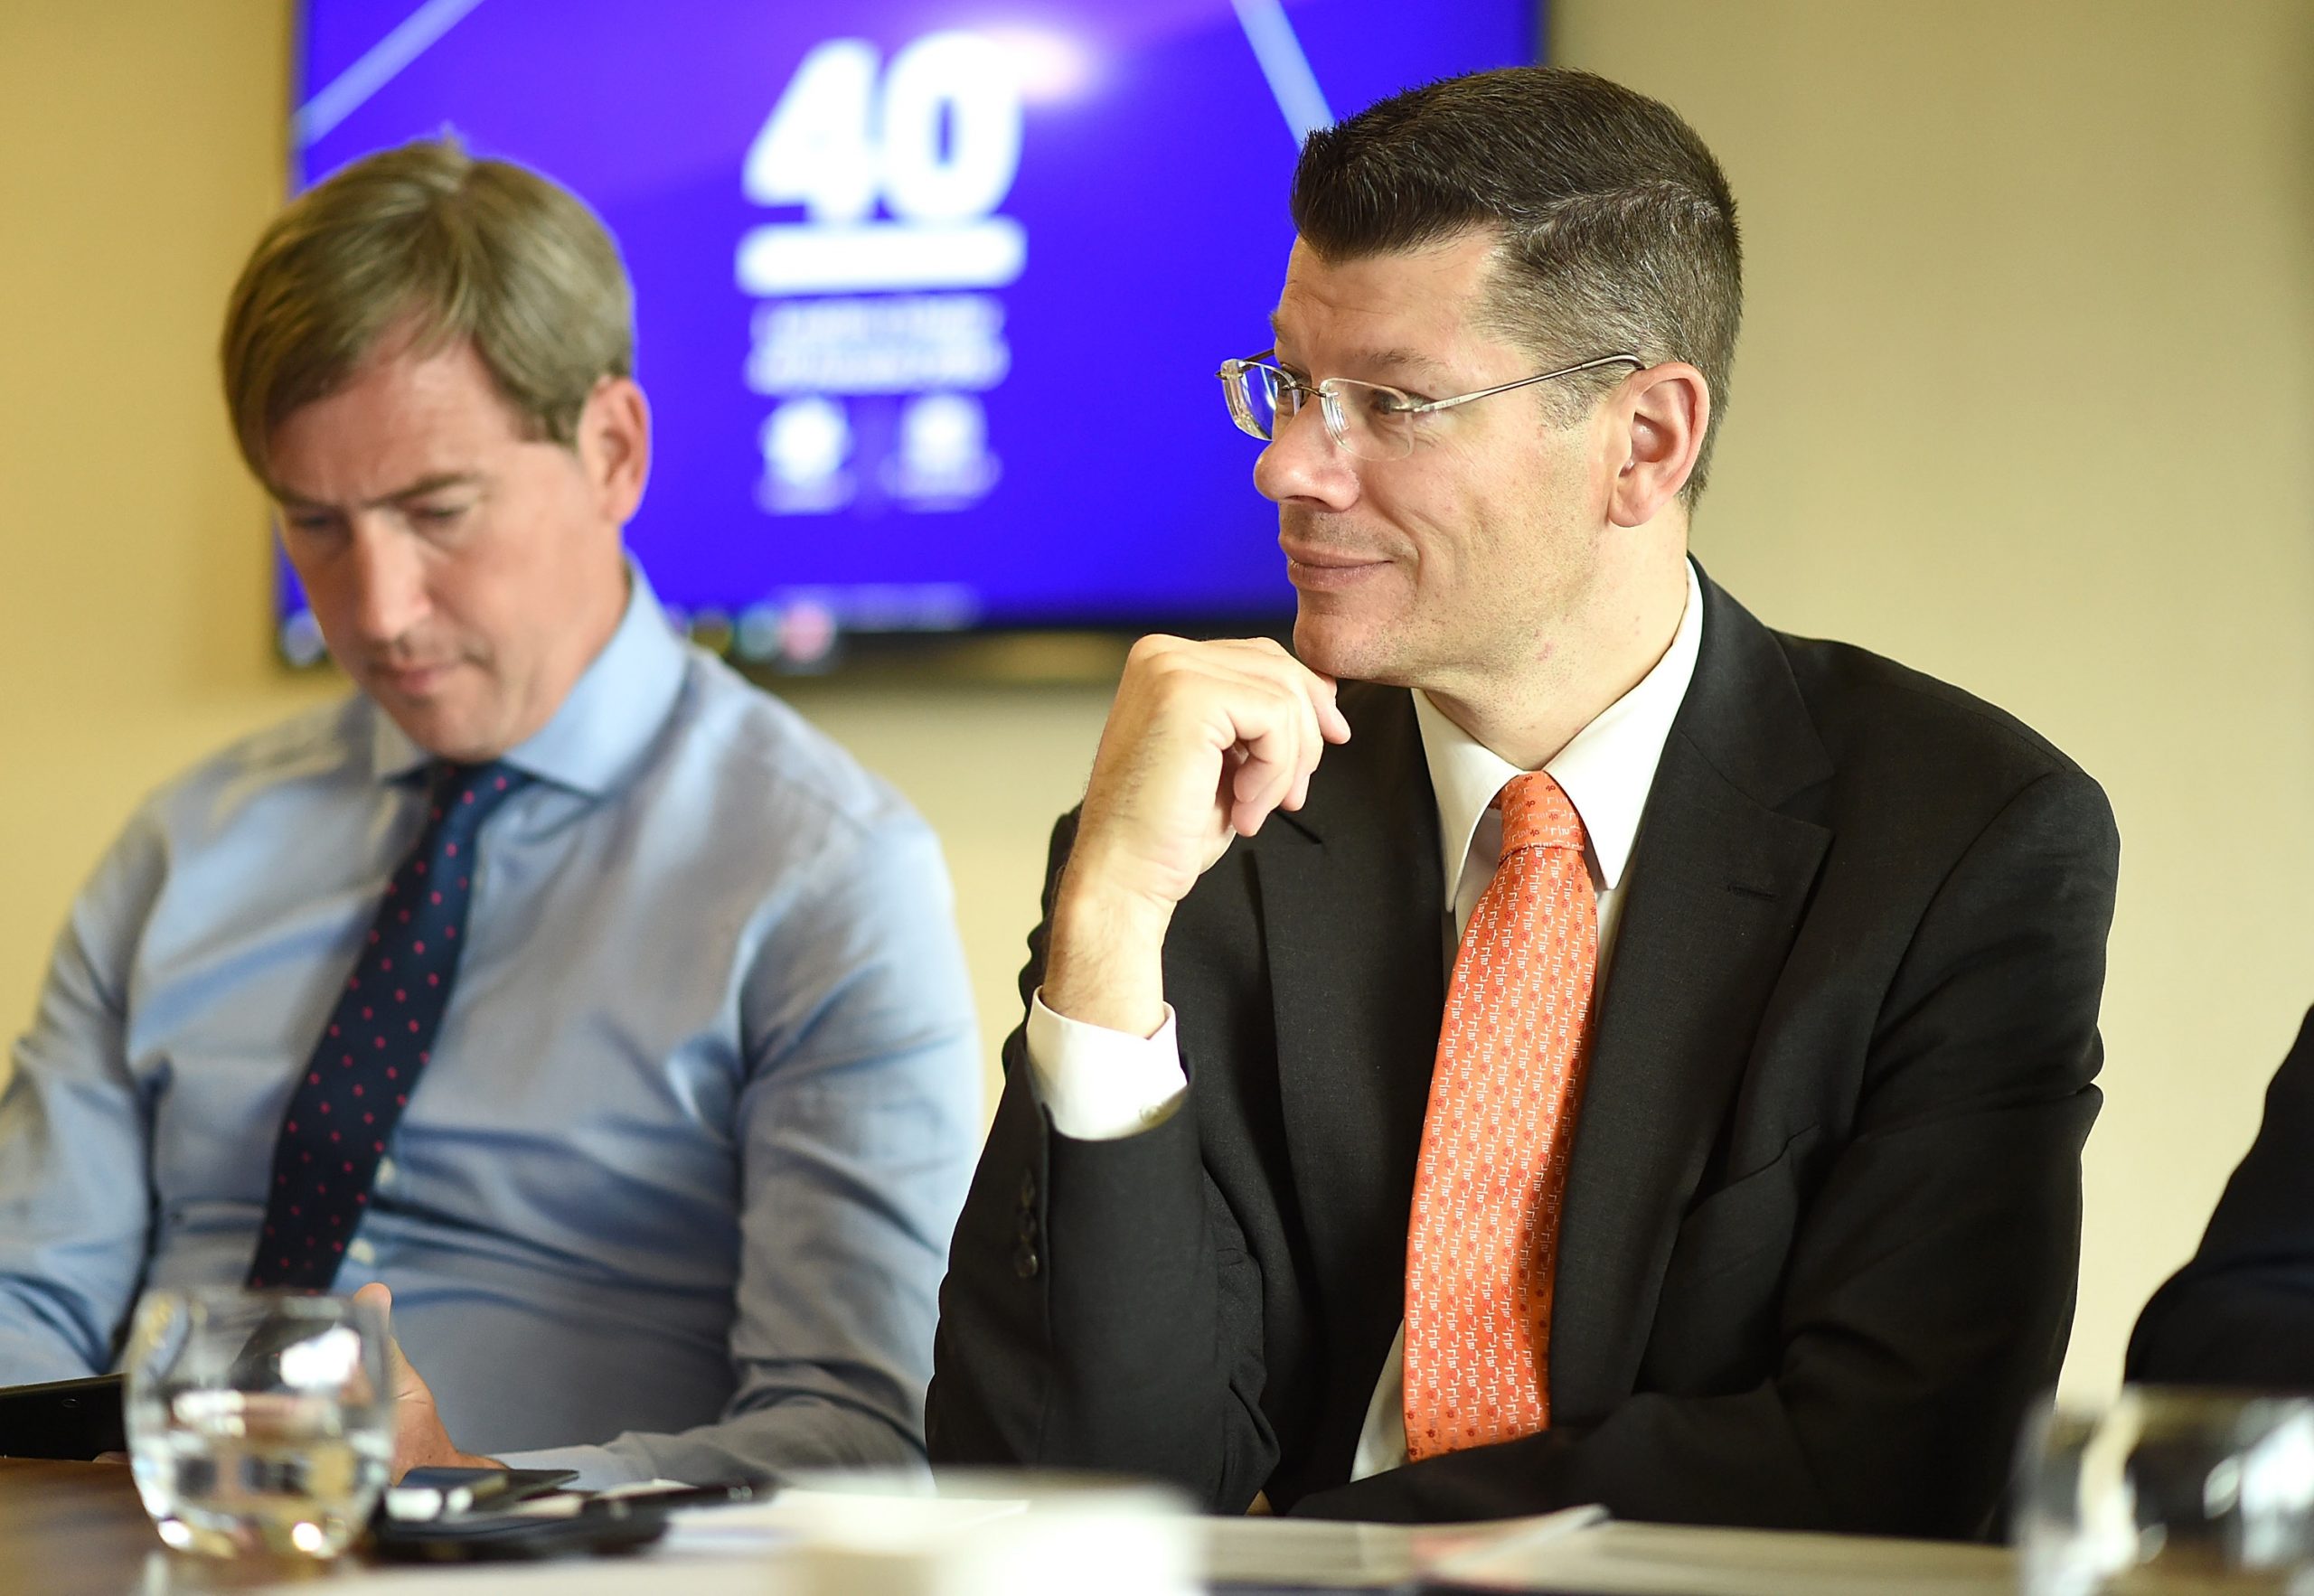 LONDON, ENGLAND - JUNE 07: Neil Doncaster takes part in Leaders U-40 Advisory Day at Stamford Bridge on July 7, 2016 in London, England.